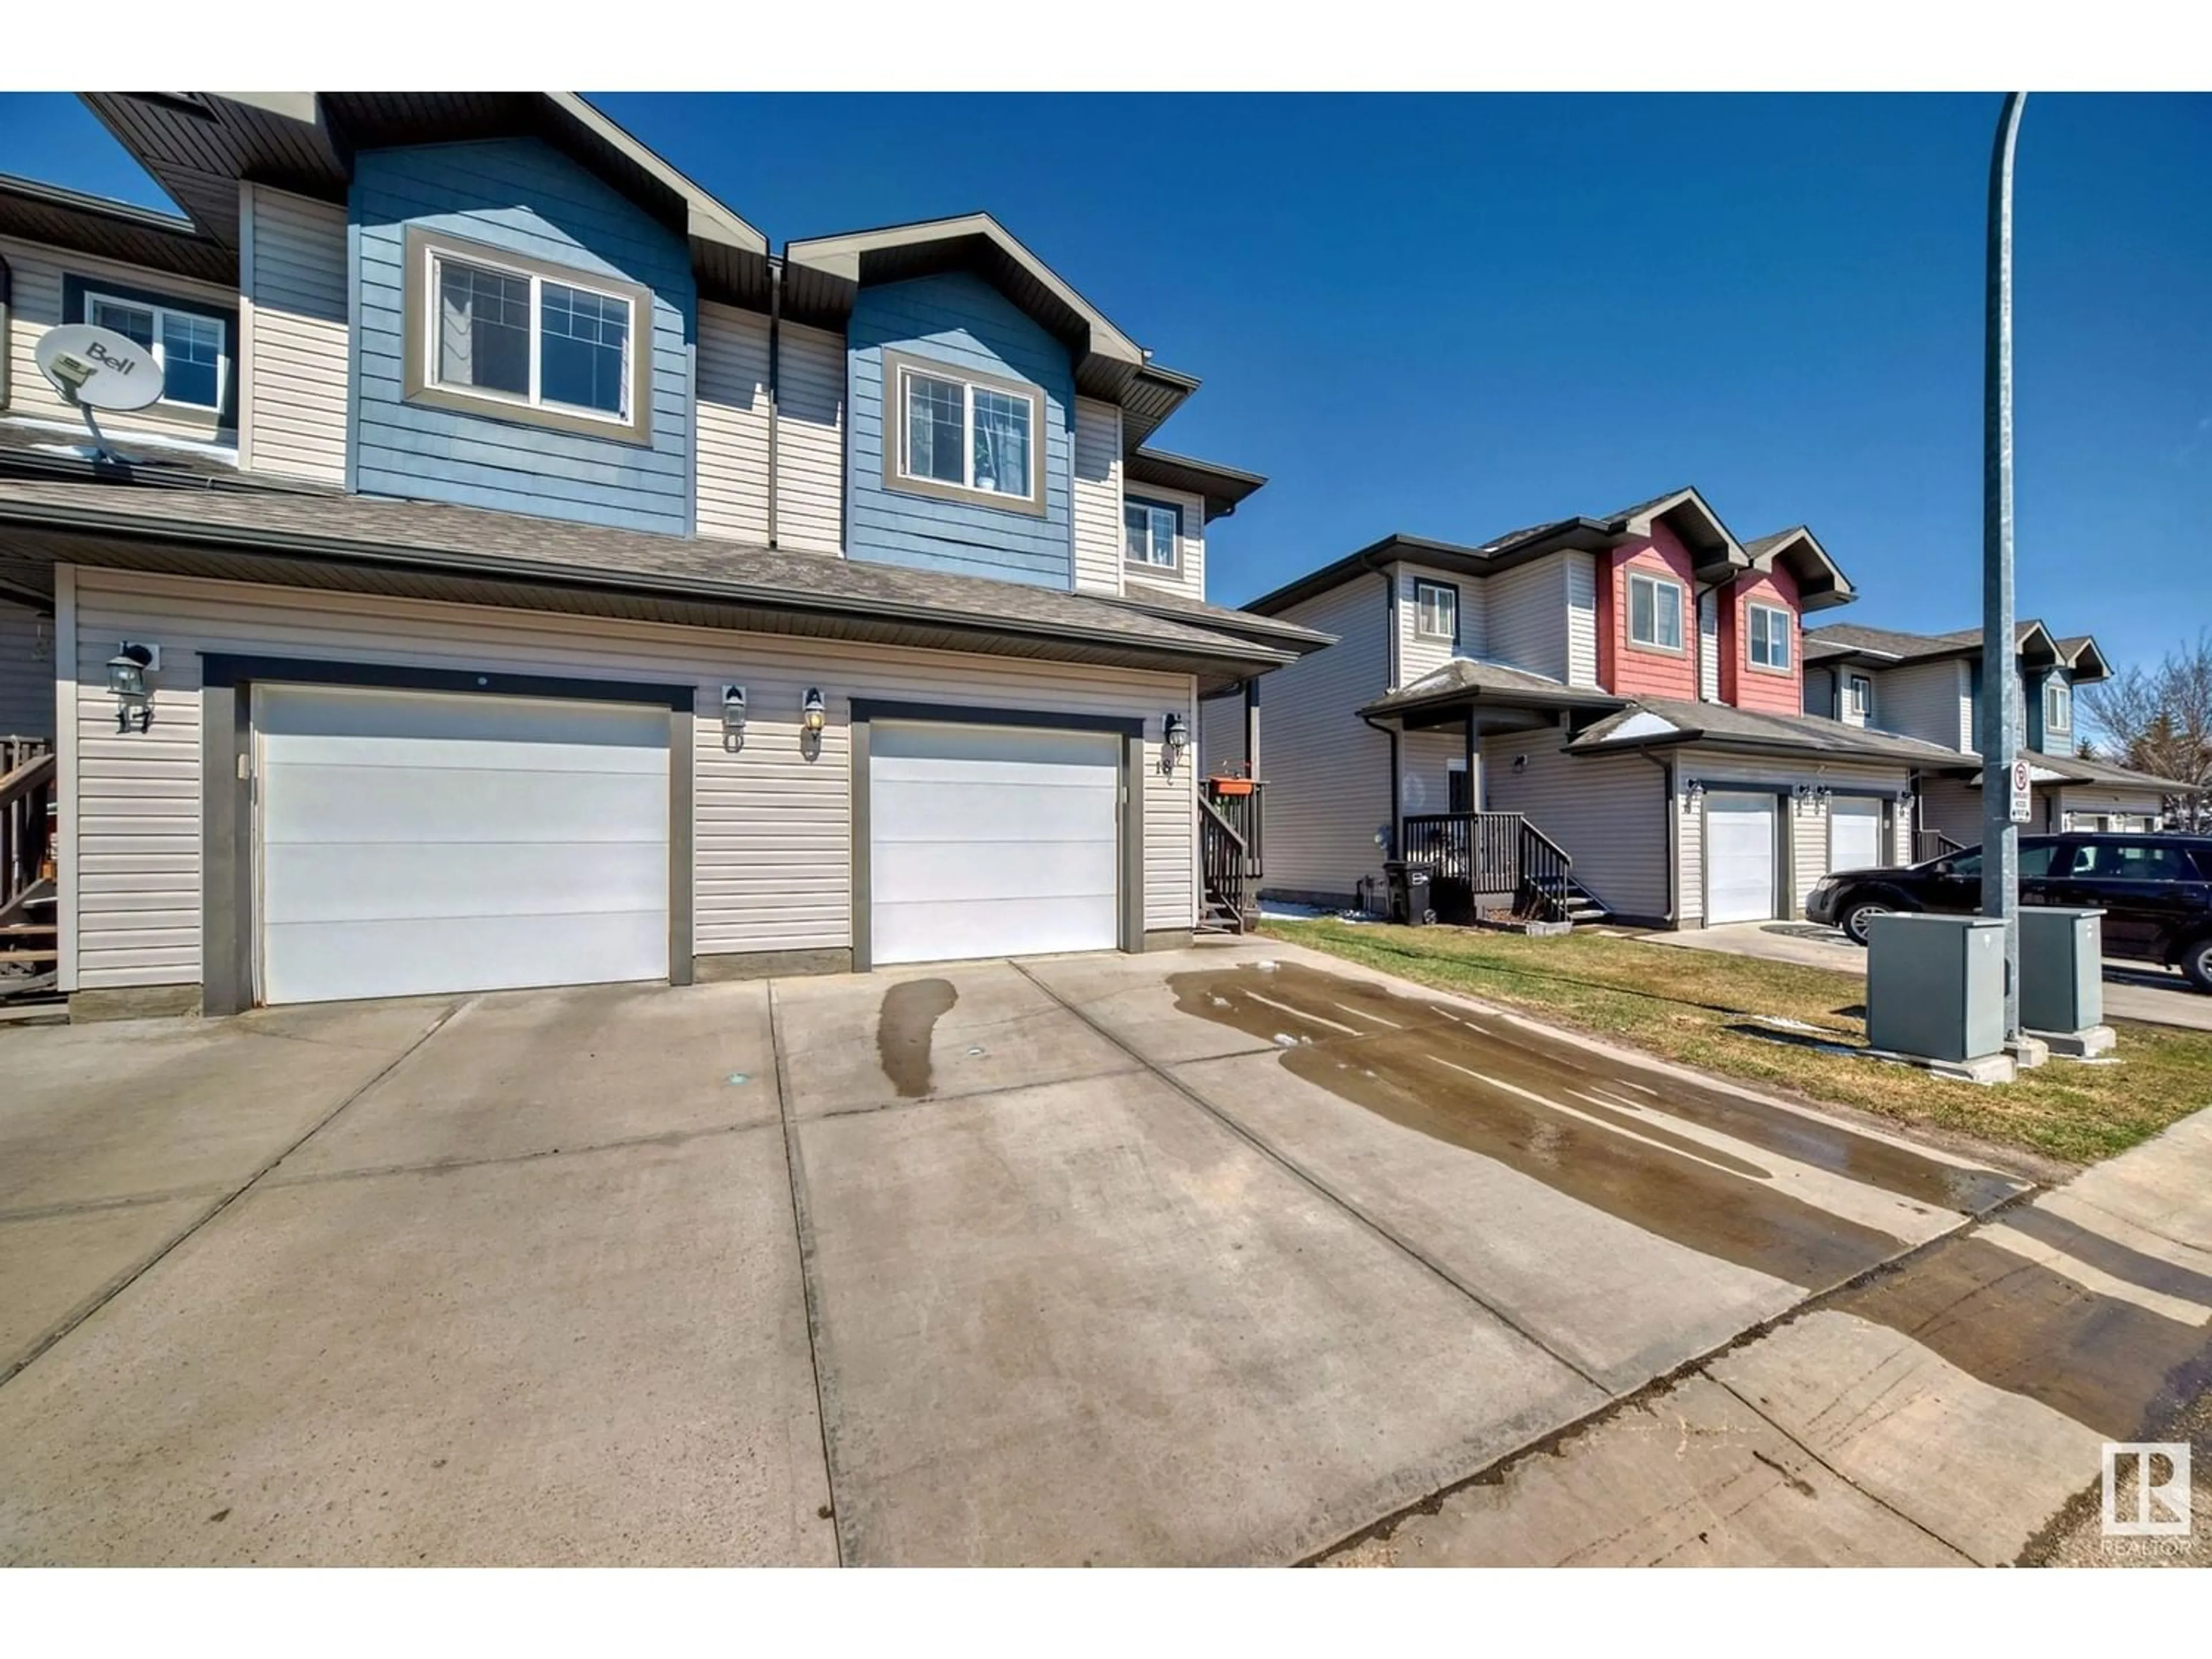 Frontside or backside of a home for #18 16004 54 ST NW, Edmonton Alberta T5Y0R1